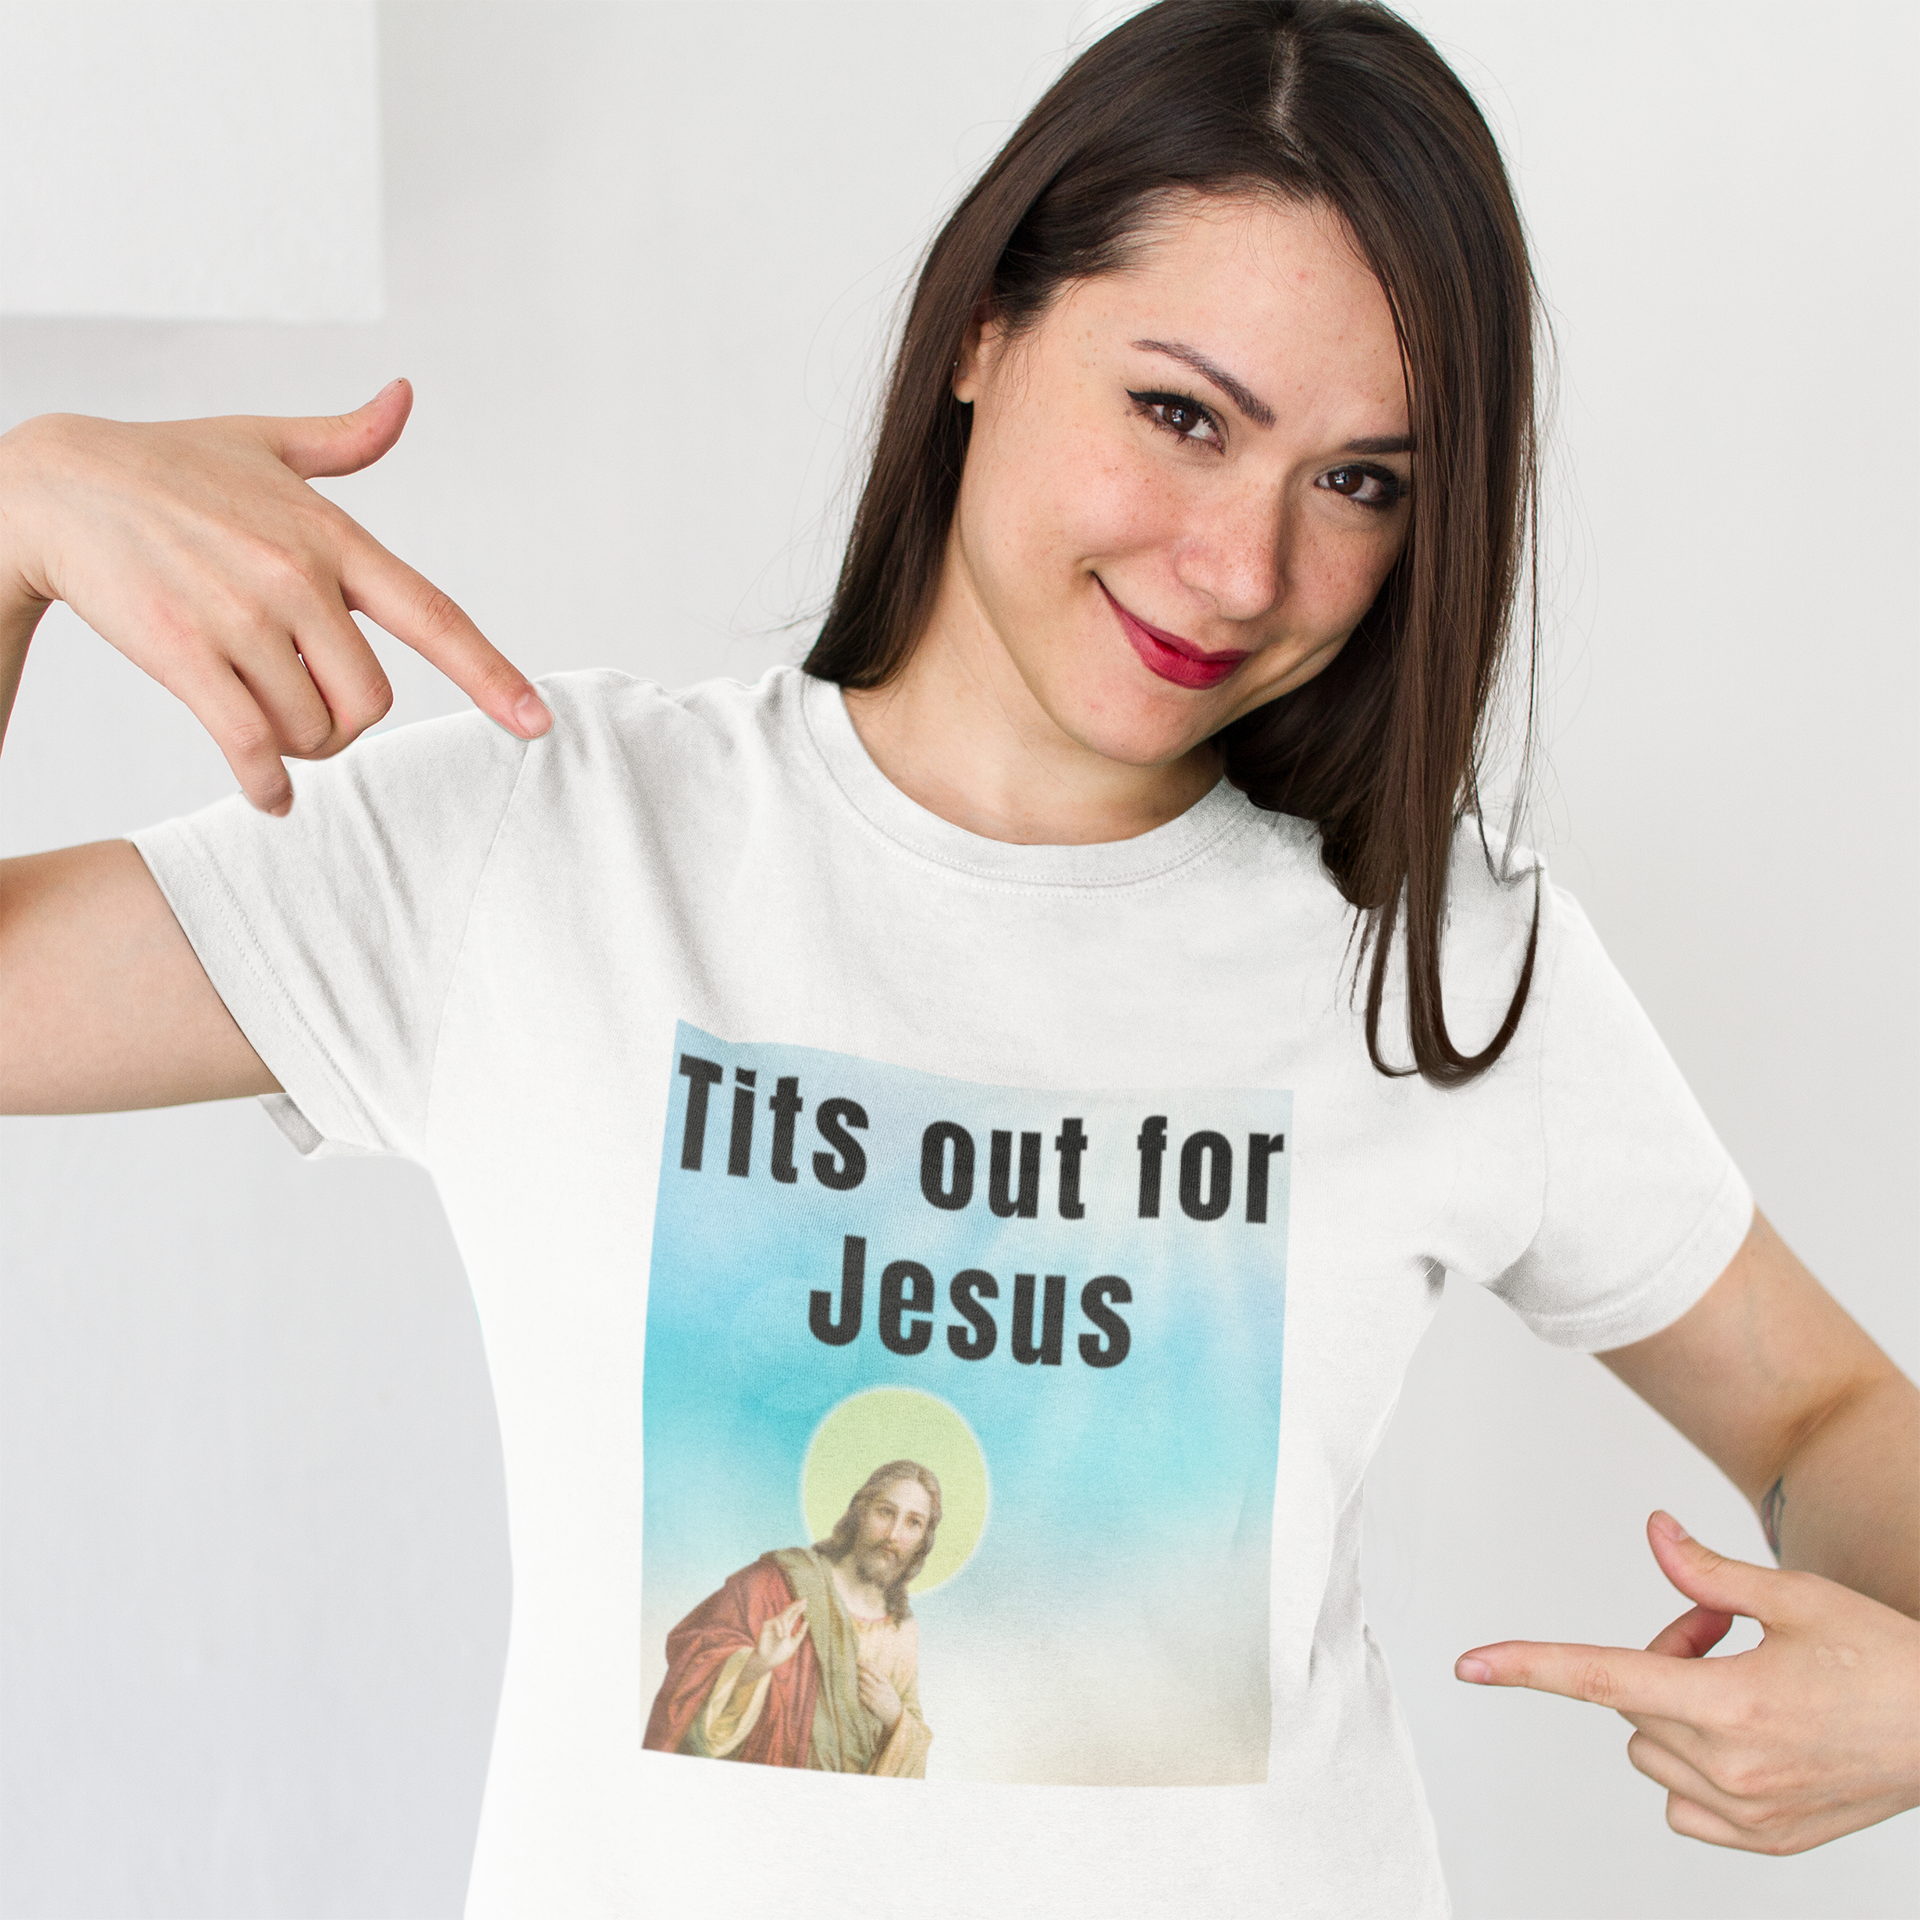 Tits out for Jesus - Unisex T-Shirt Christmas gift dads day gift gift for dad gift for grandpa gift for her gift for him gift for mom gift for sister gift for wife moms gift Unique gift